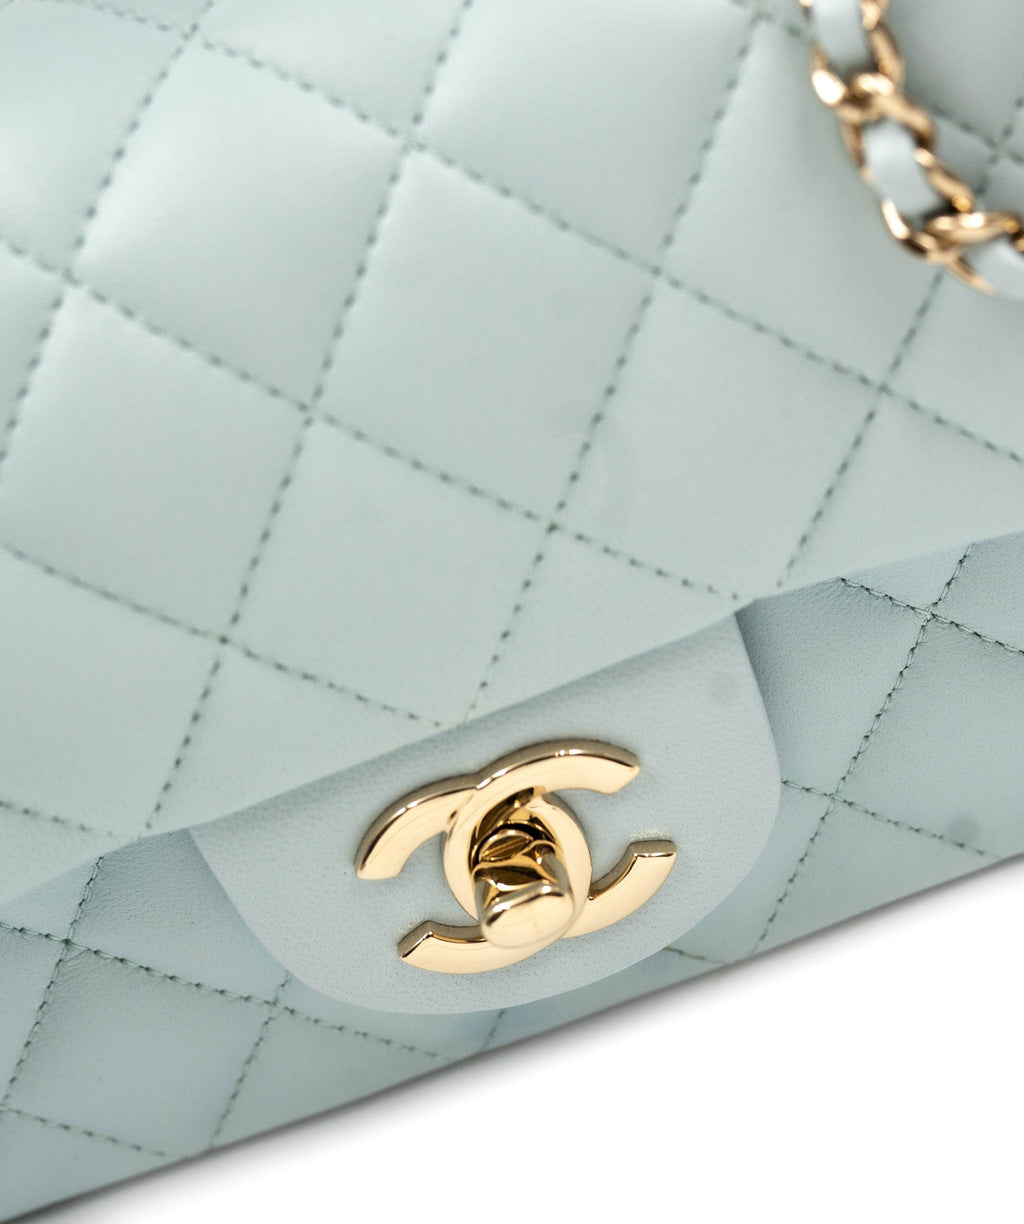 Chanel Baby Blue Coco Handle Bag - AWL3642 – LuxuryPromise